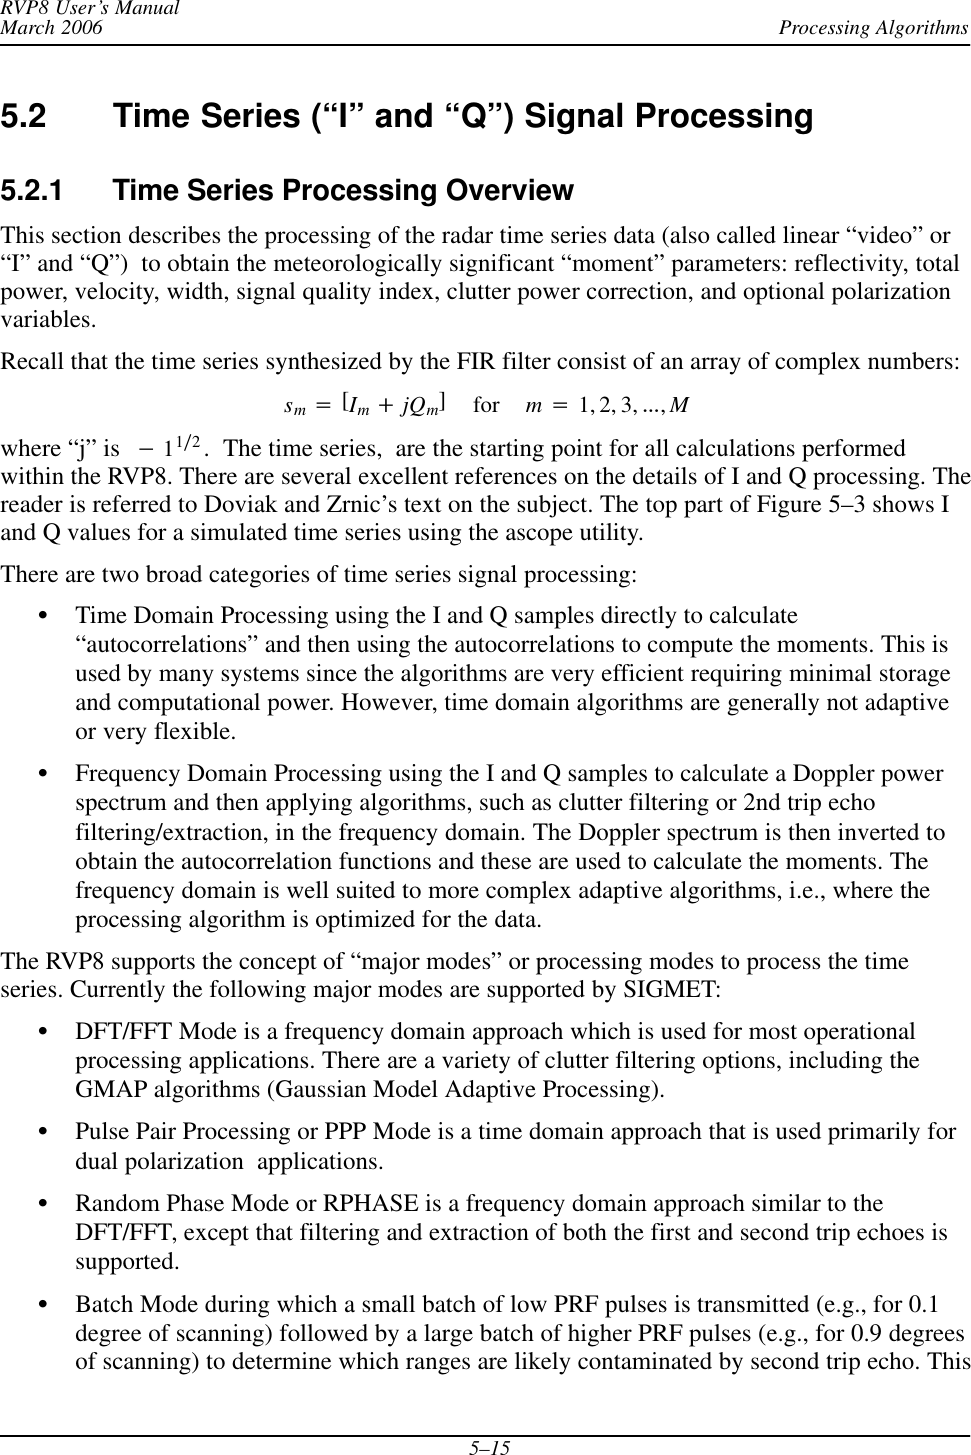 Processing AlgorithmsRVP8 User’s ManualMarch 20065–155.2 Time Series (“I” and “Q”) Signal Processing5.2.1 Time Series Processing OverviewThis section describes the processing of the radar time series data (also called linear “video” or“I” and “Q”)  to obtain the meteorologically significant “moment” parameters: reflectivity, totalpower, velocity, width, signal quality index, clutter power correction, and optional polarizationvariables.Recall that the time series synthesized by the FIR filter consist of an array of complex numbers:sm+[Im)jQm]for m+1, 2, 3, AAA,Mwhere “j” is *11ń2.  The time series,  are the starting point for all calculations performedwithin the RVP8. There are several excellent references on the details of I and Q processing. Thereader is referred to Doviak and Zrnic’s text on the subject. The top part of Figure 5–3 shows Iand Q values for a simulated time series using the ascope utility.There are two broad categories of time series signal processing:STime Domain Processing using the I and Q samples directly to calculate“autocorrelations” and then using the autocorrelations to compute the moments. This isused by many systems since the algorithms are very efficient requiring minimal storageand computational power. However, time domain algorithms are generally not adaptiveor very flexible.SFrequency Domain Processing using the I and Q samples to calculate a Doppler powerspectrum and then applying algorithms, such as clutter filtering or 2nd trip echofiltering/extraction, in the frequency domain. The Doppler spectrum is then inverted toobtain the autocorrelation functions and these are used to calculate the moments. Thefrequency domain is well suited to more complex adaptive algorithms, i.e., where theprocessing algorithm is optimized for the data.The RVP8 supports the concept of “major modes” or processing modes to process the timeseries. Currently the following major modes are supported by SIGMET:SDFT/FFT Mode is a frequency domain approach which is used for most operationalprocessing applications. There are a variety of clutter filtering options, including theGMAP algorithms (Gaussian Model Adaptive Processing).SPulse Pair Processing or PPP Mode is a time domain approach that is used primarily fordual polarization  applications.SRandom Phase Mode or RPHASE is a frequency domain approach similar to theDFT/FFT, except that filtering and extraction of both the first and second trip echoes issupported.SBatch Mode during which a small batch of low PRF pulses is transmitted (e.g., for 0.1degree of scanning) followed by a large batch of higher PRF pulses (e.g., for 0.9 degreesof scanning) to determine which ranges are likely contaminated by second trip echo. This